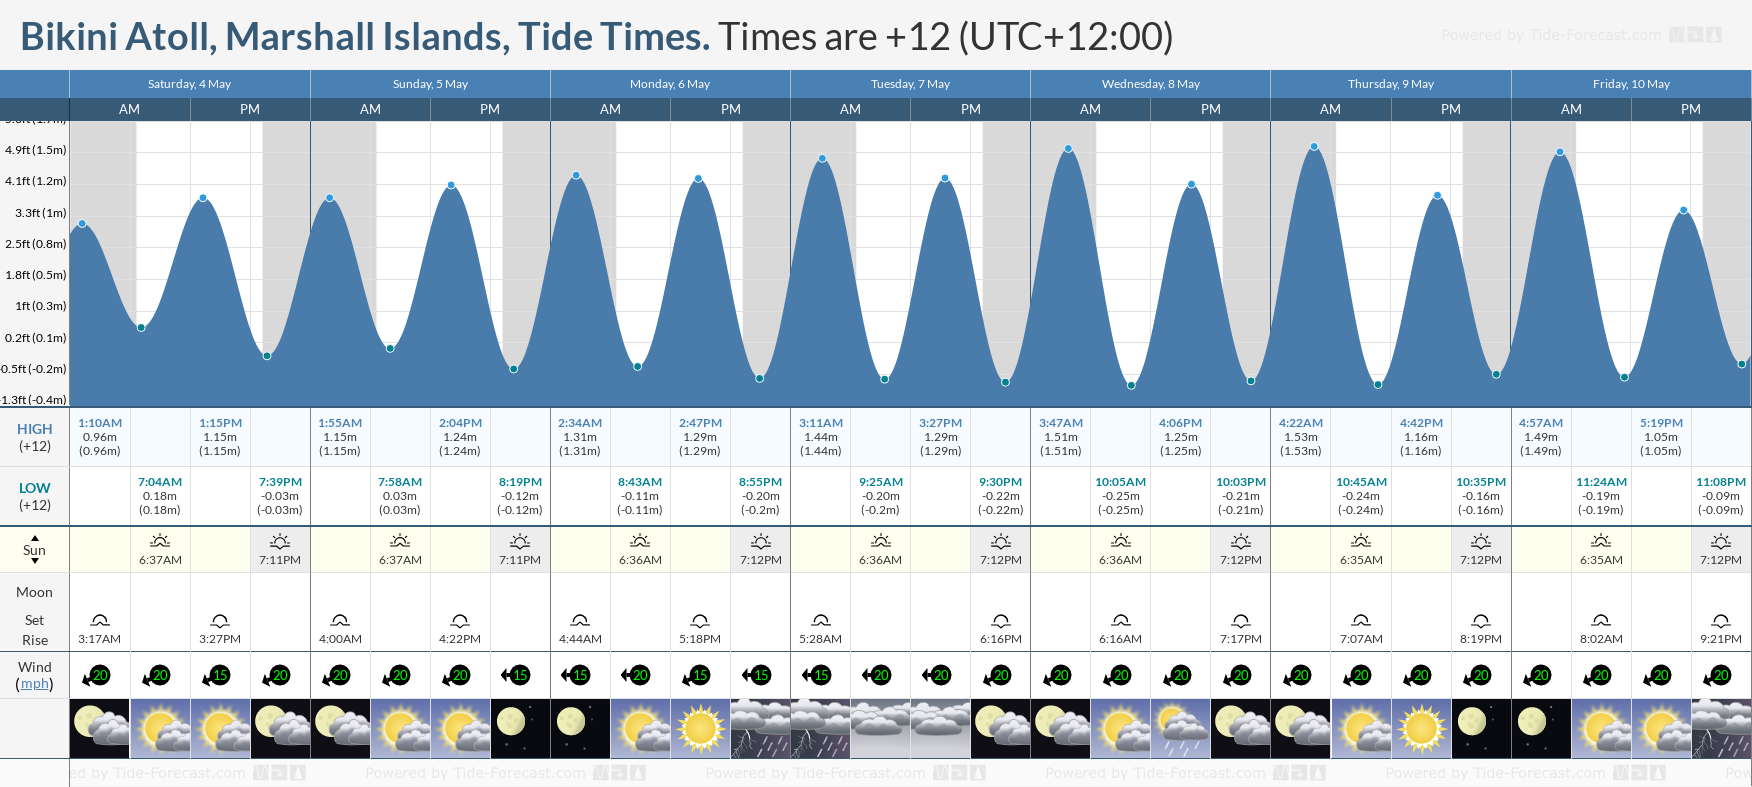 Bikini Atoll, Marshall Islands Tide Chart including high and low tide tide times for the next 7 days